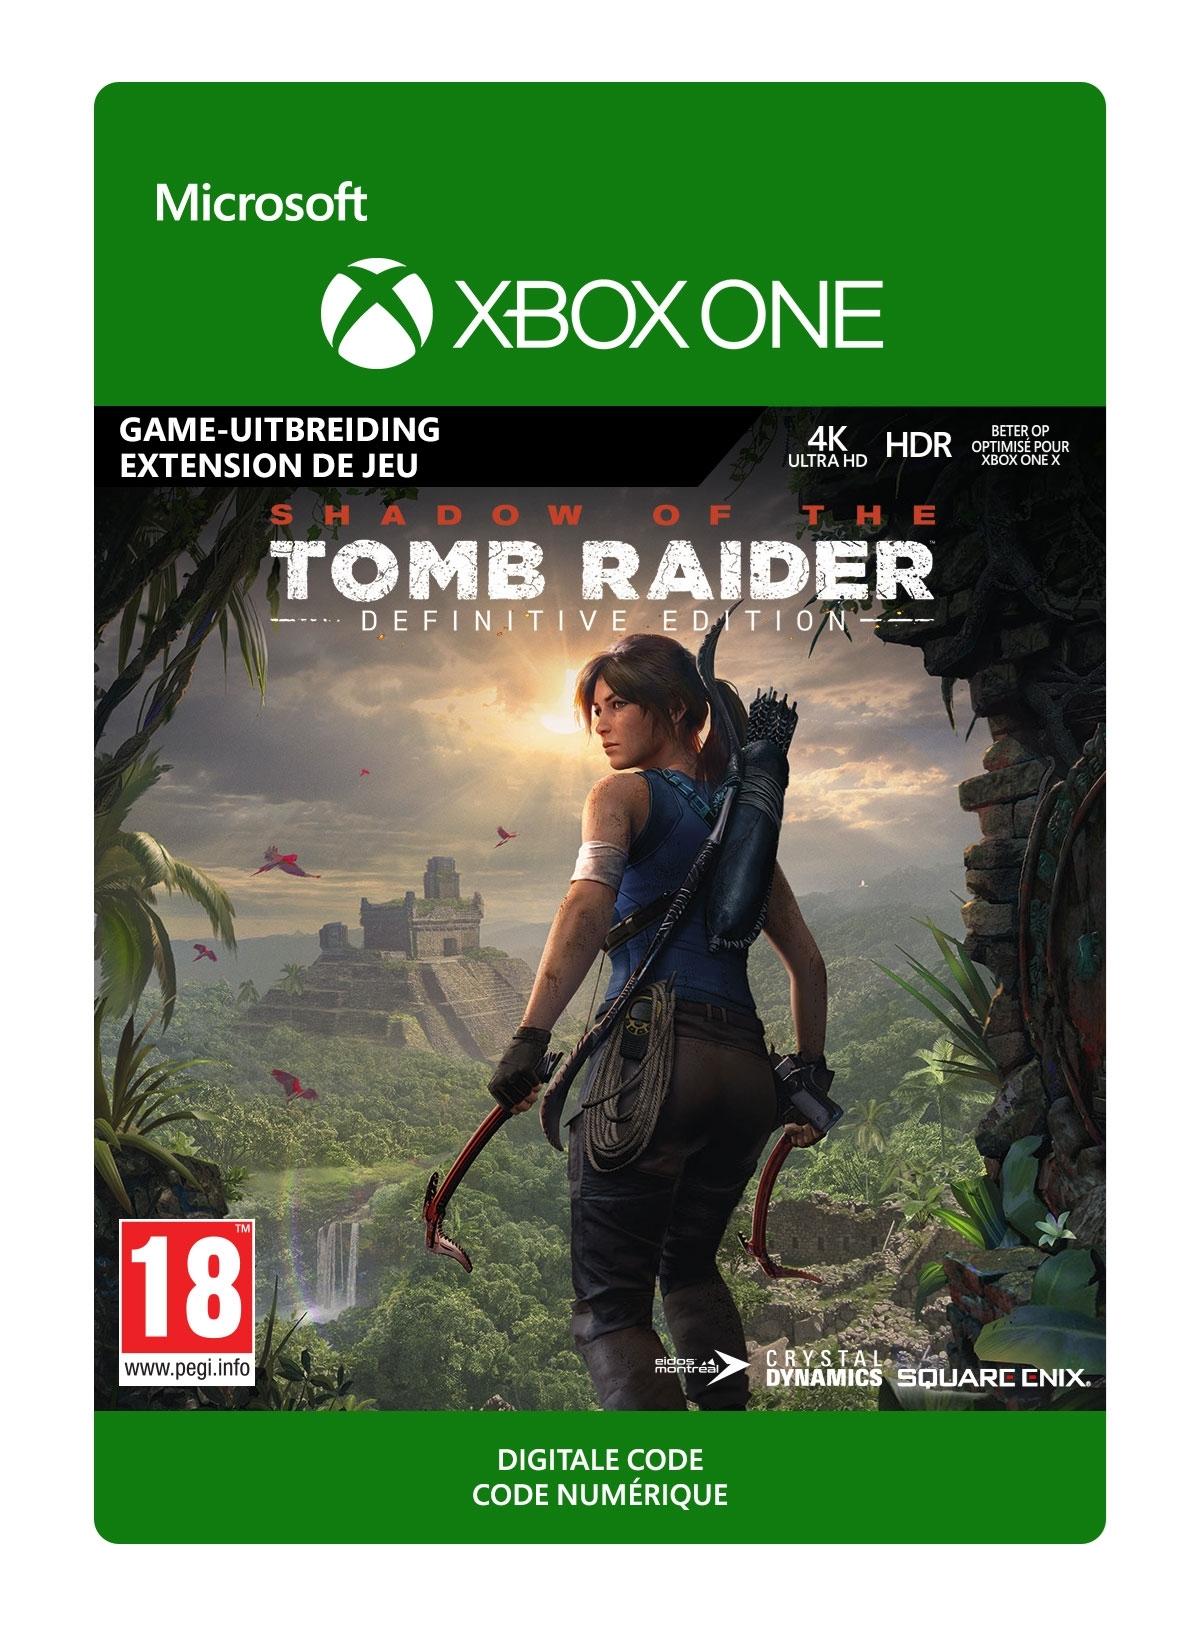 Shadow of the Tomb Raider: Definitive Edition Extra Content - Xbox One - Add-on | 7D4-00519 (033b0290-1337-8748-bf1f-f051b43f5f17)